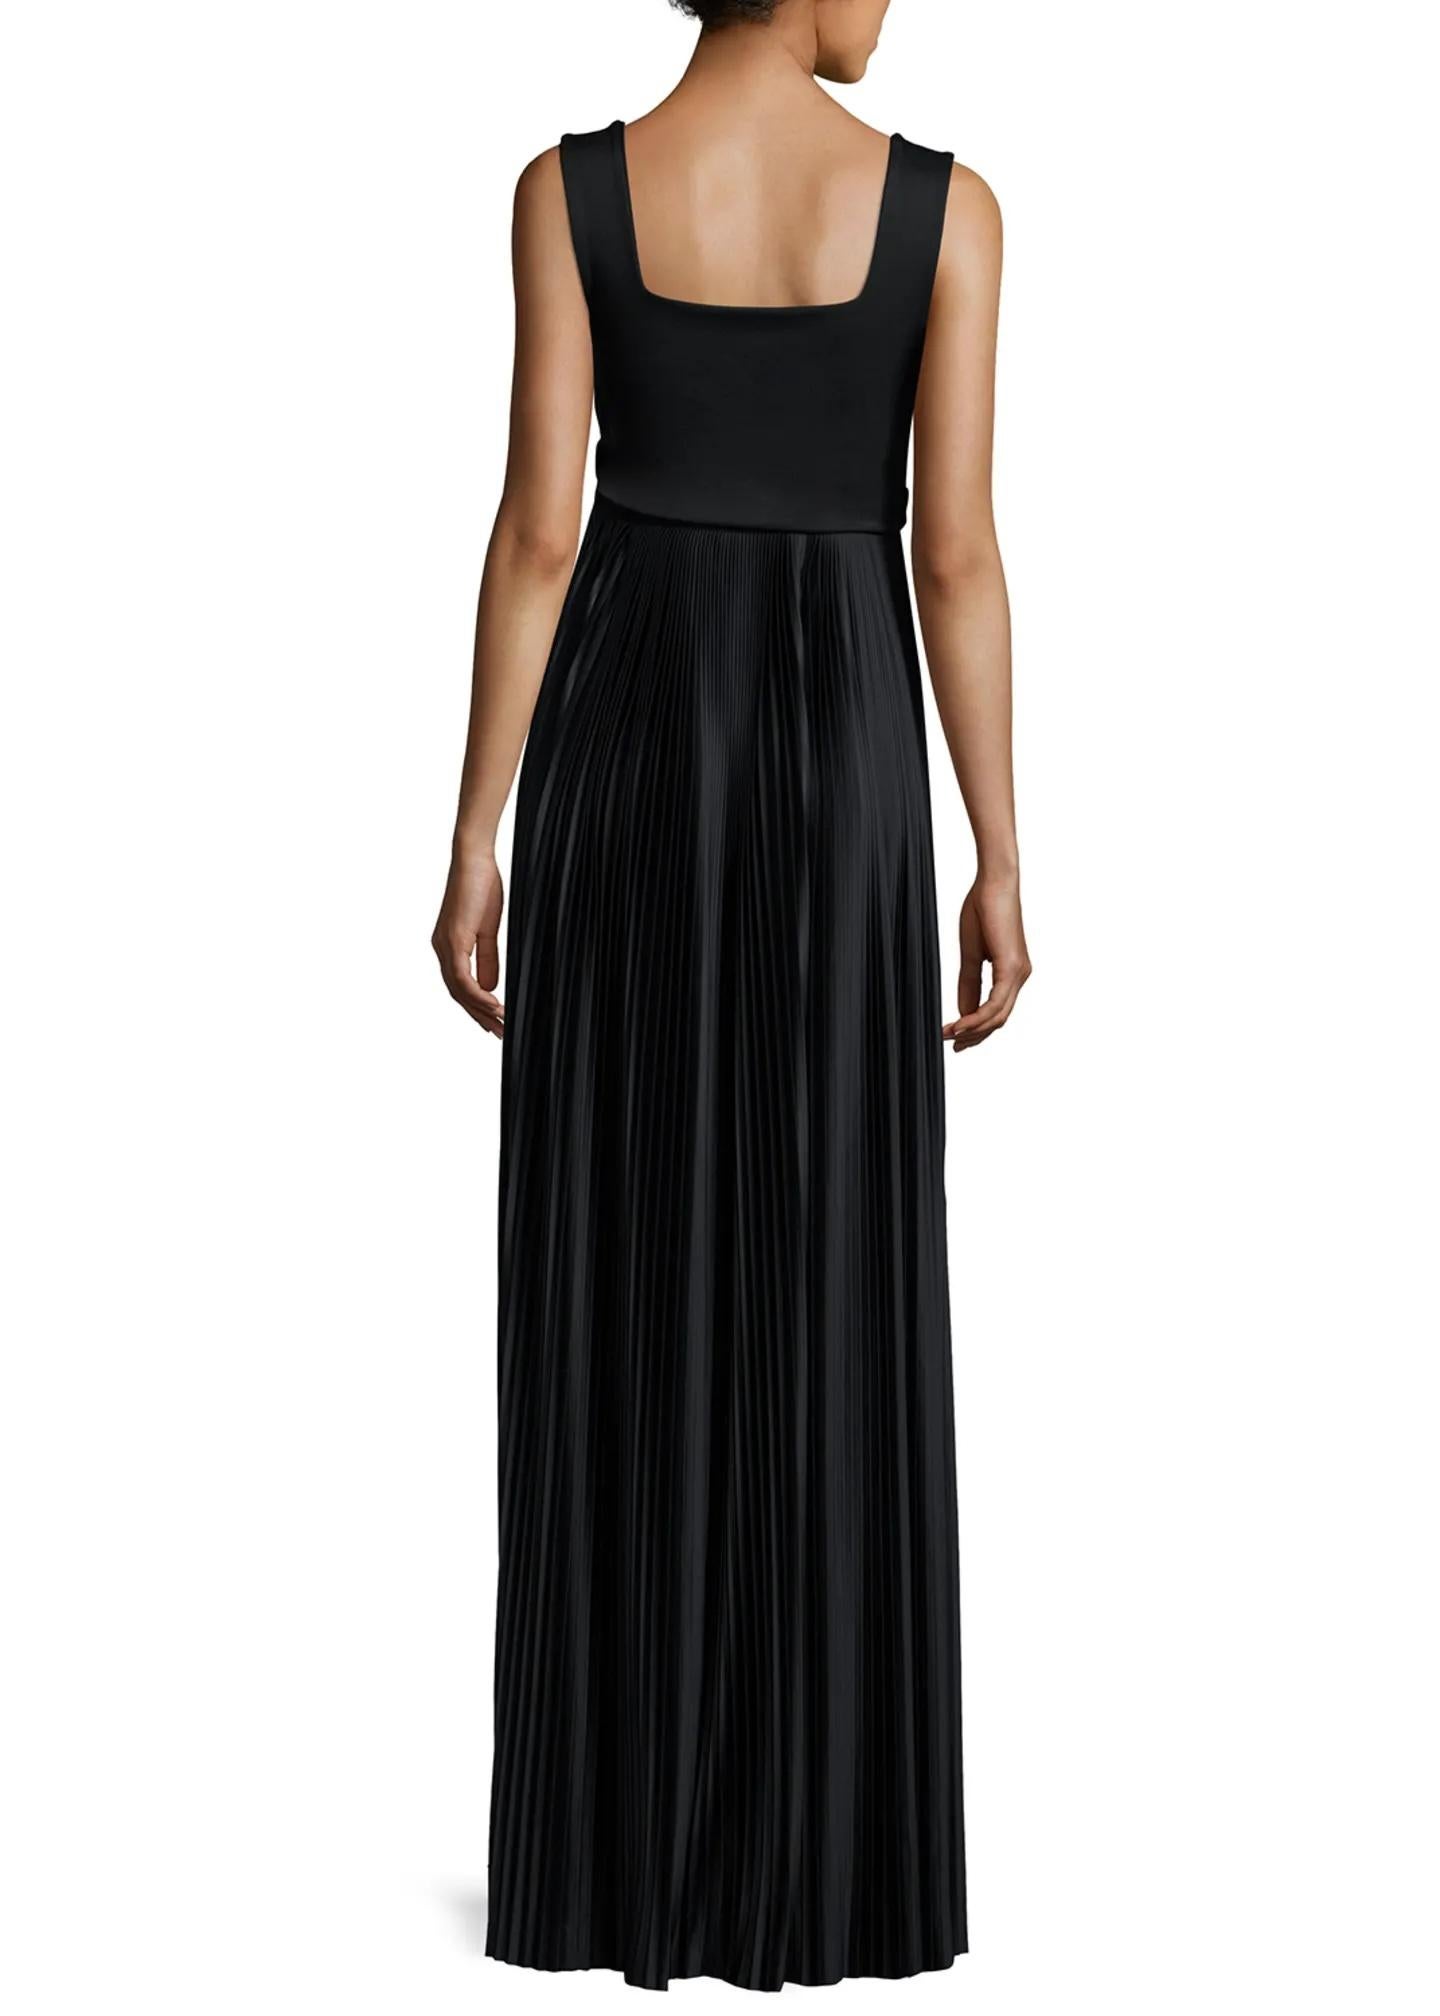 Introducing the epitome of sophistication and timeless elegance: The Row Alain Black Dress in size XS. Crafted to perfection and brand new with tags, this exquisite gown exudes understated luxury from every seam.

The gown features a soft-sheen